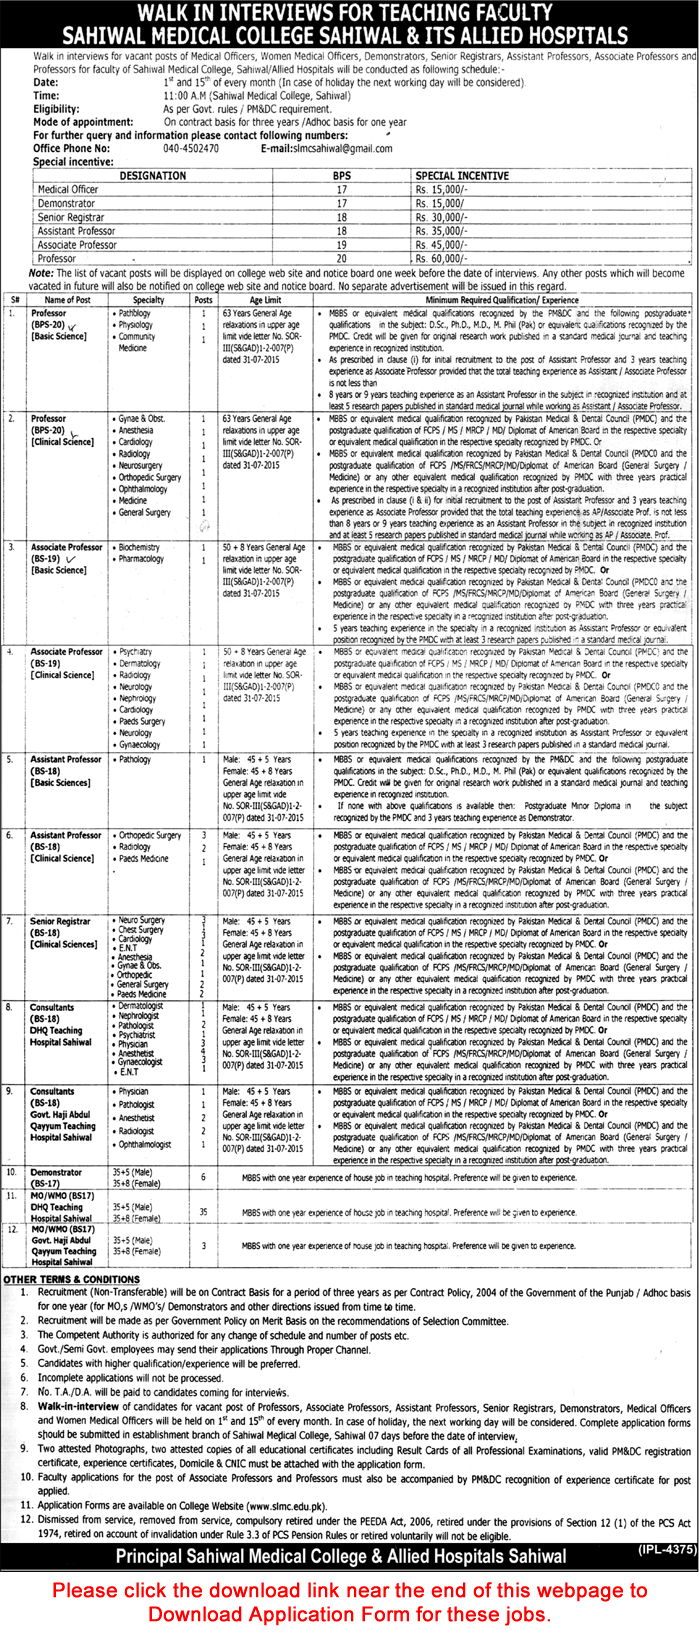 Sahiwal Medical College & Allied Hospitals Jobs 2018 April Teaching Faculty & Medical Officers Walk in Interviews Latest